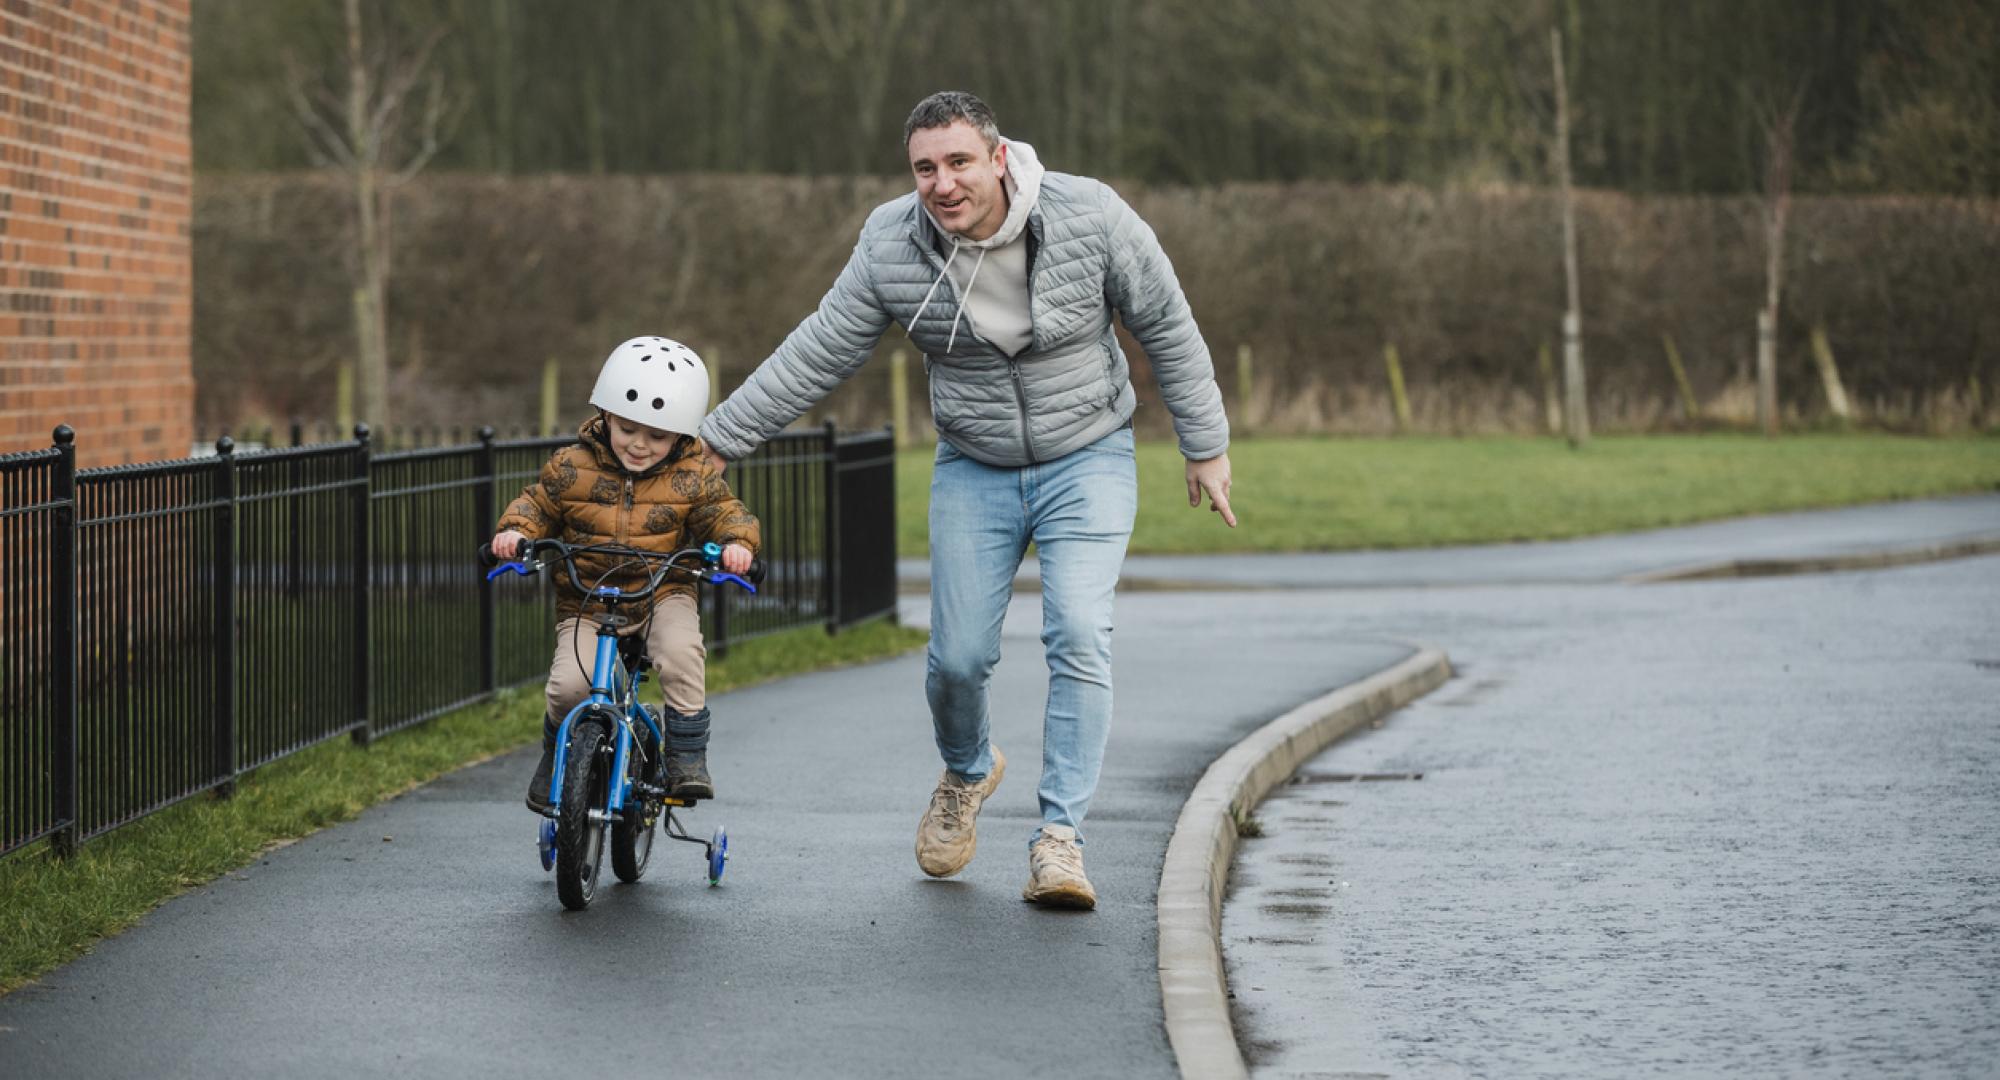 Young boy learning to ride a bike with his dad